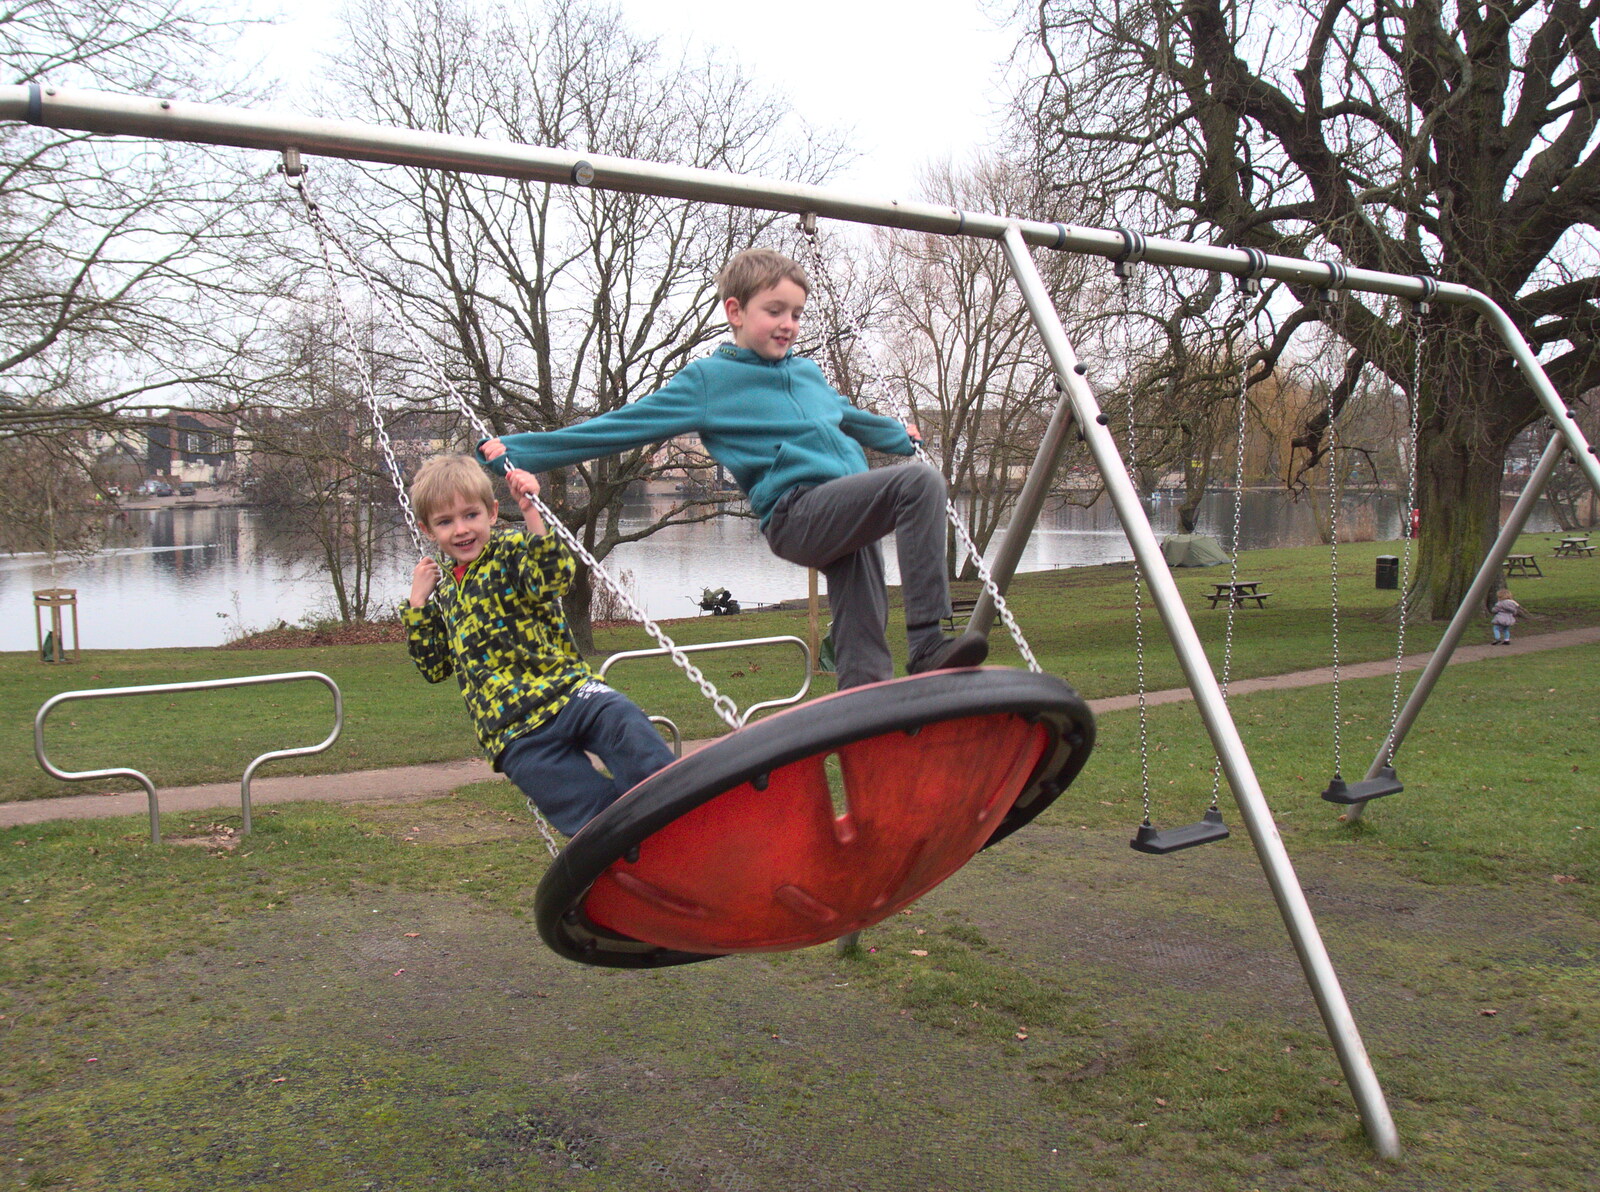 The boys on a swing from January Misc: Haircut 100, Diss, Norfolk - 14th January 2018